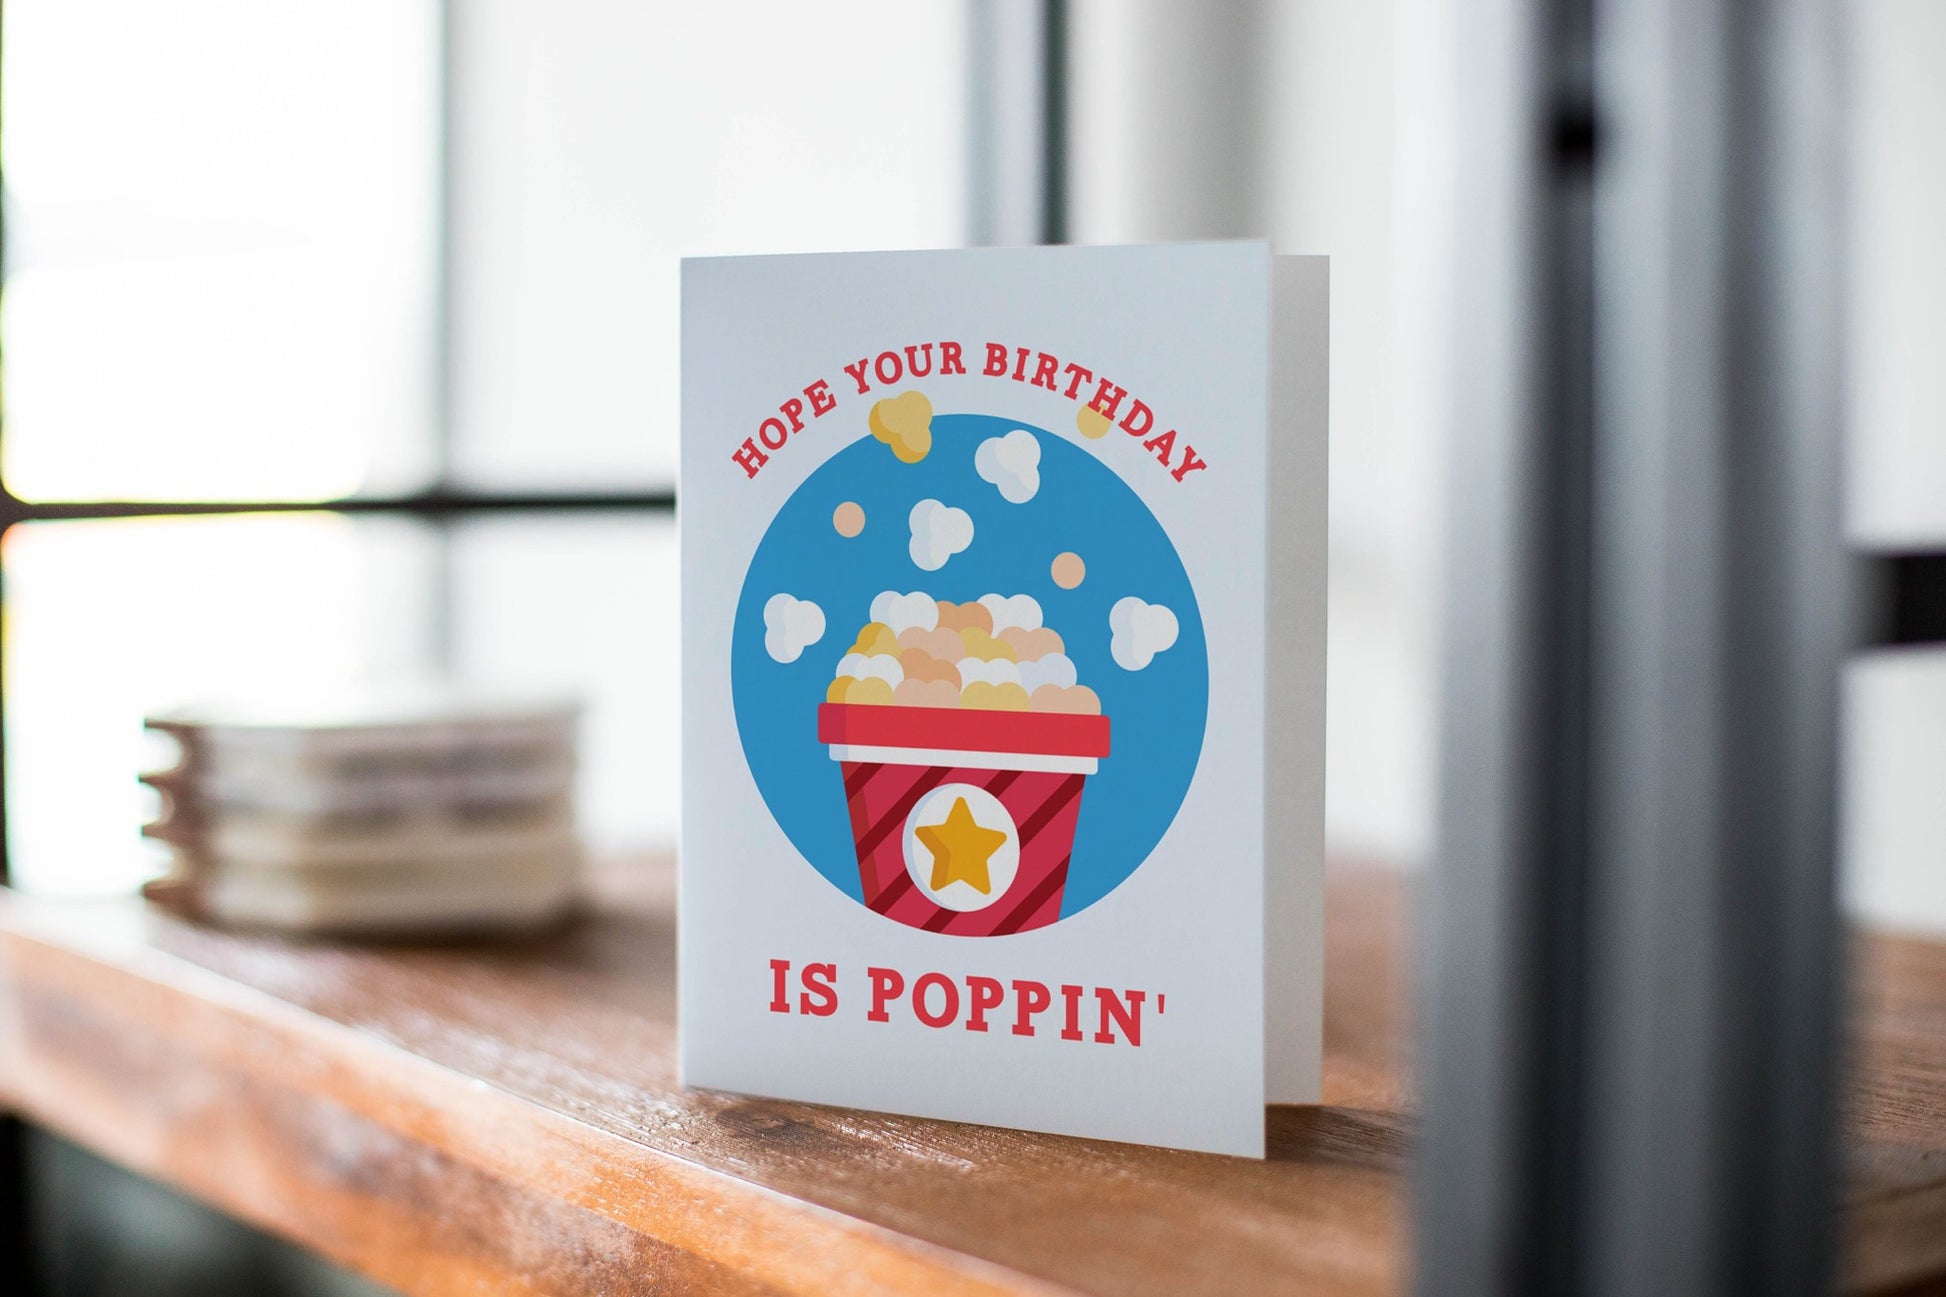 Hope Your Birthday is Poppin' -Kids Birthday Greeting Card.